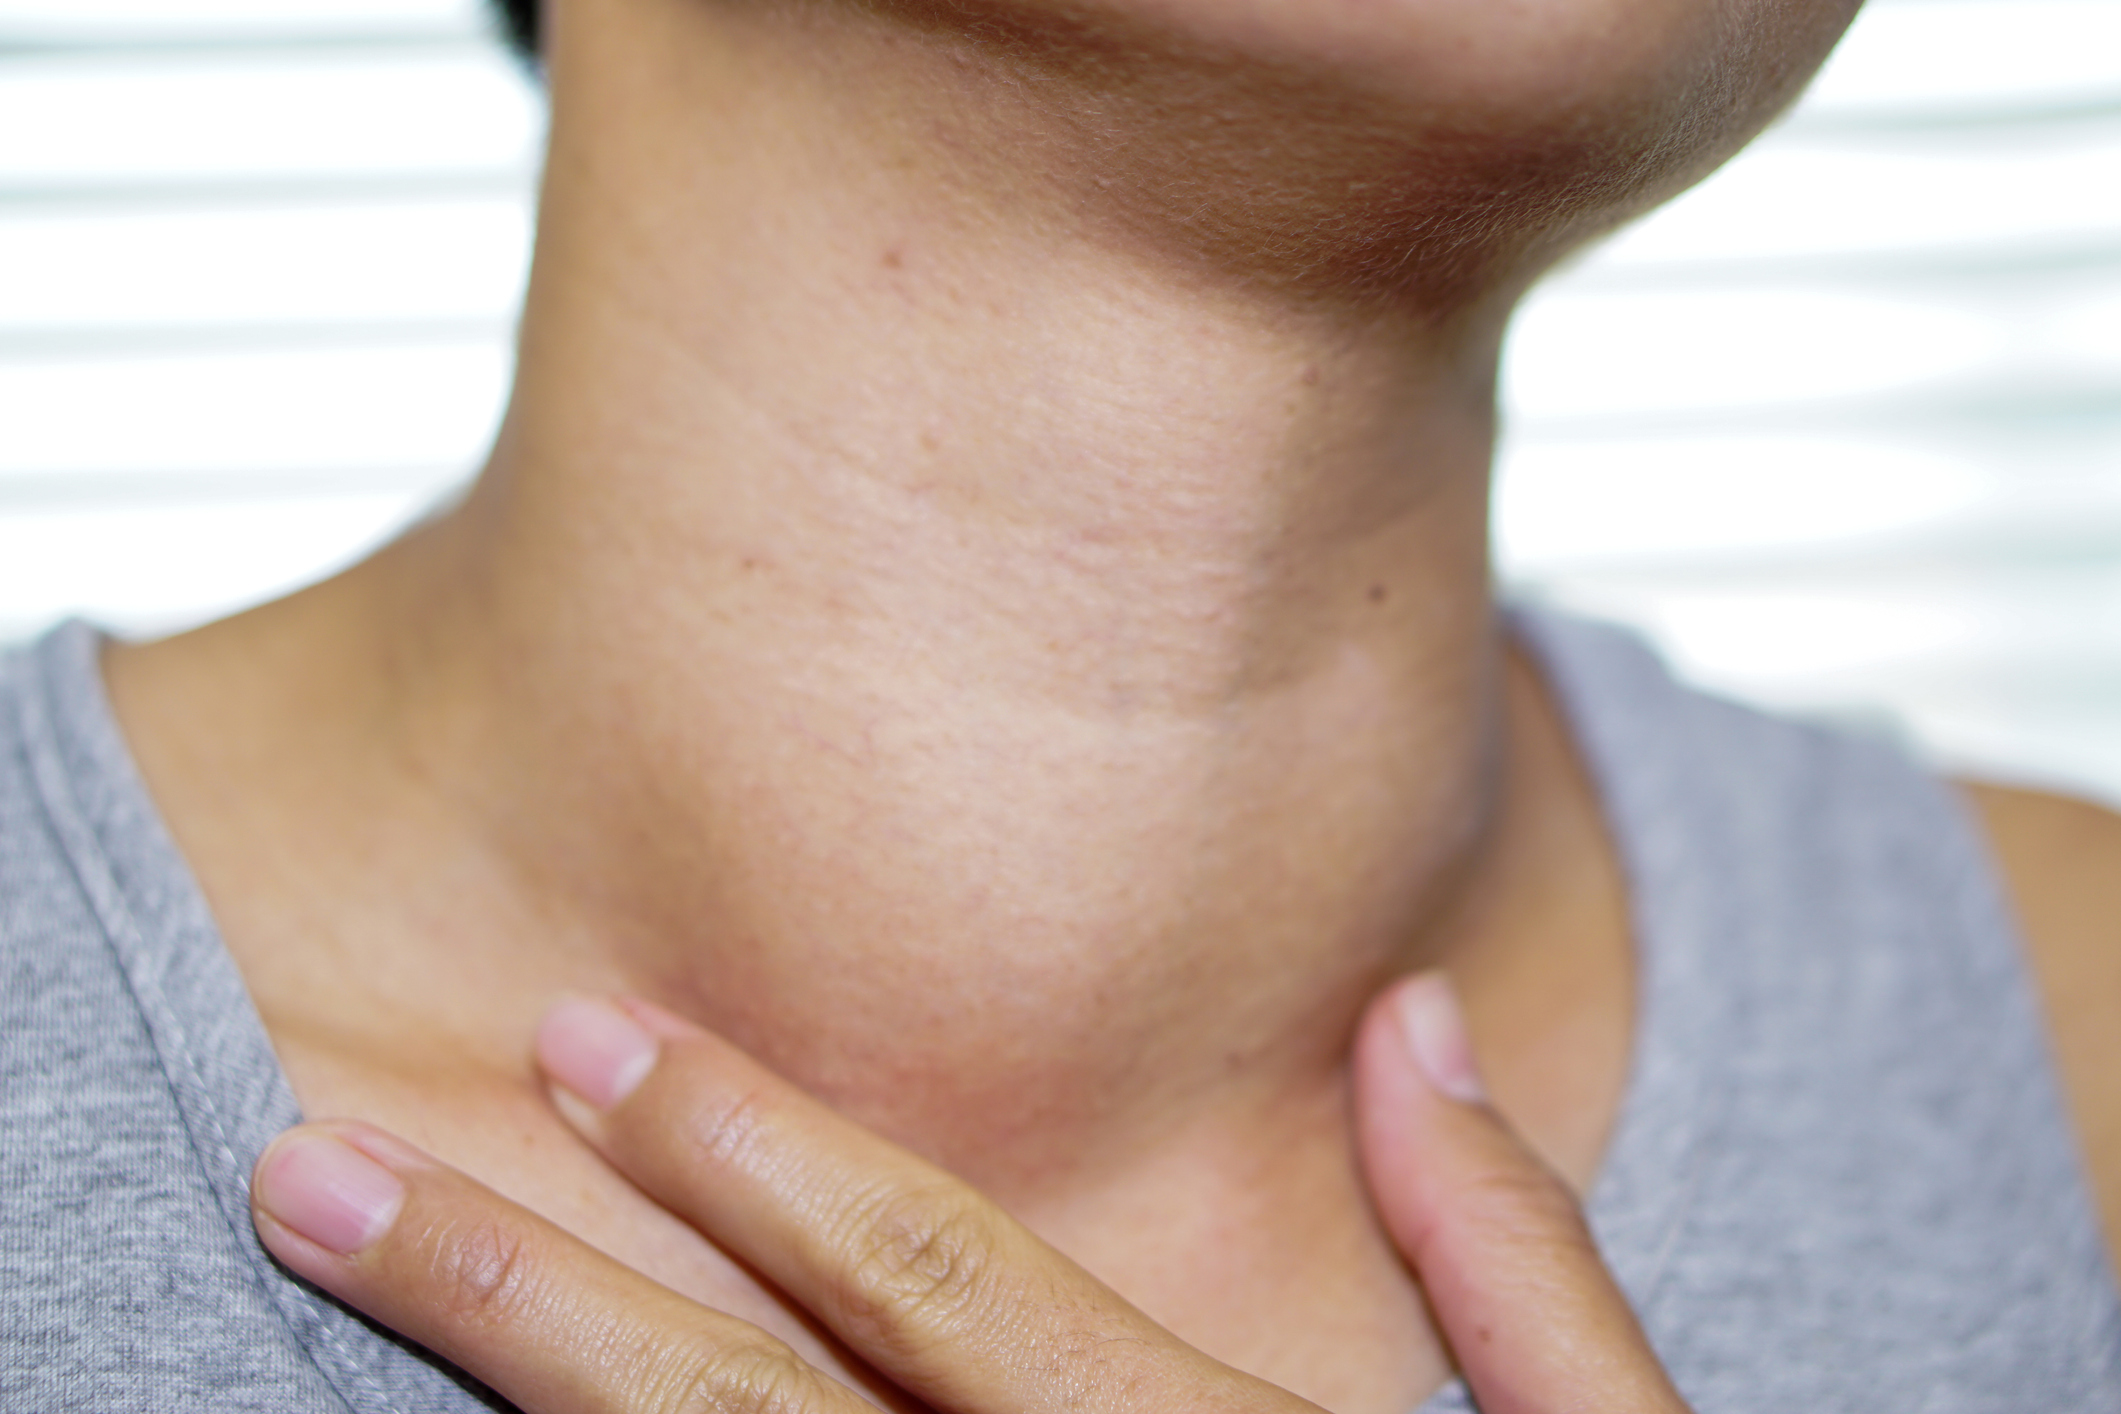 Visible enlargement of the thyroid gland, called goiter, is a very common consequence of insufficient iodine intake in the diet.